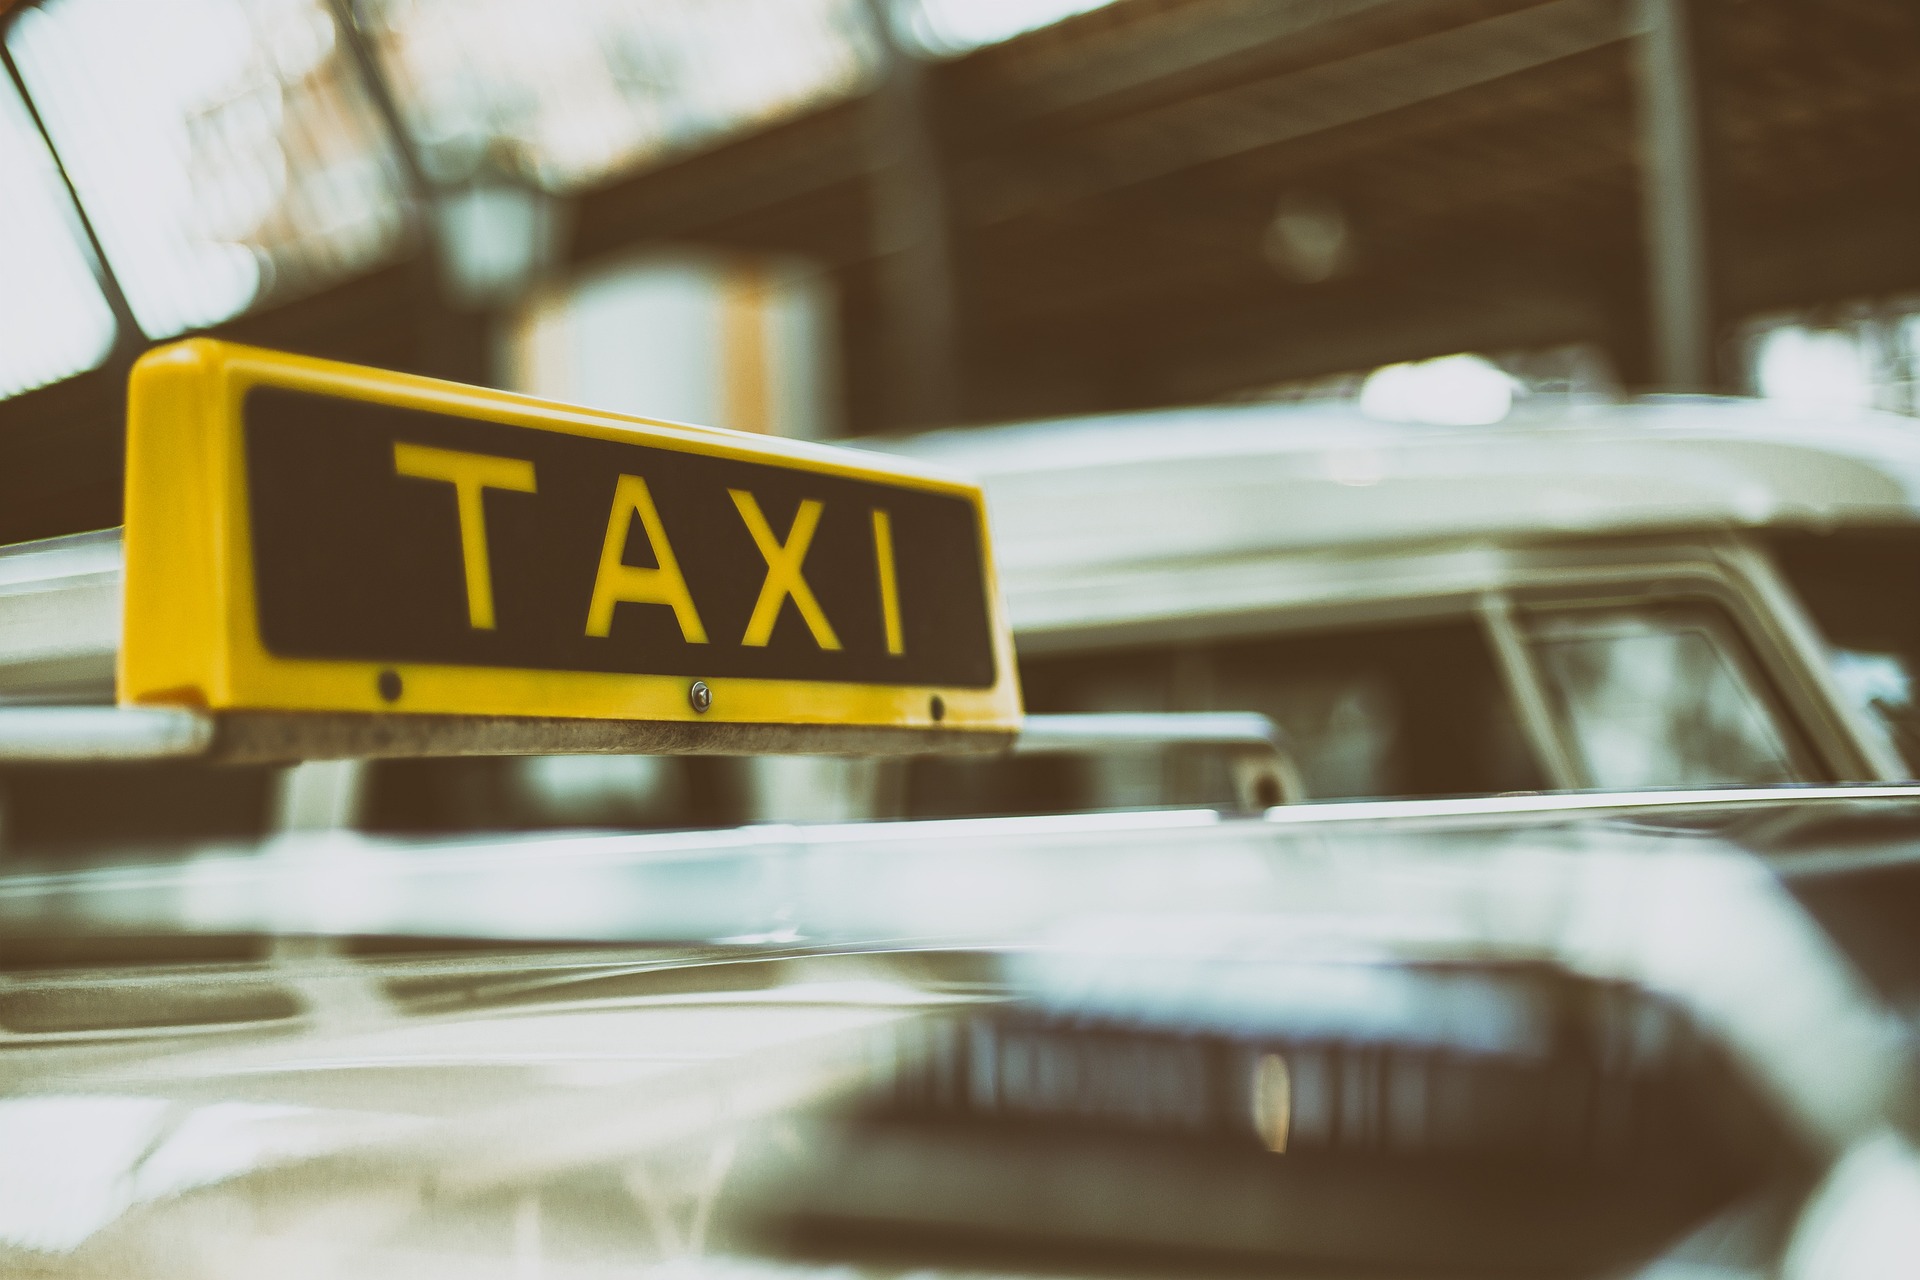 Taxis and Ridesharing in Wrocław